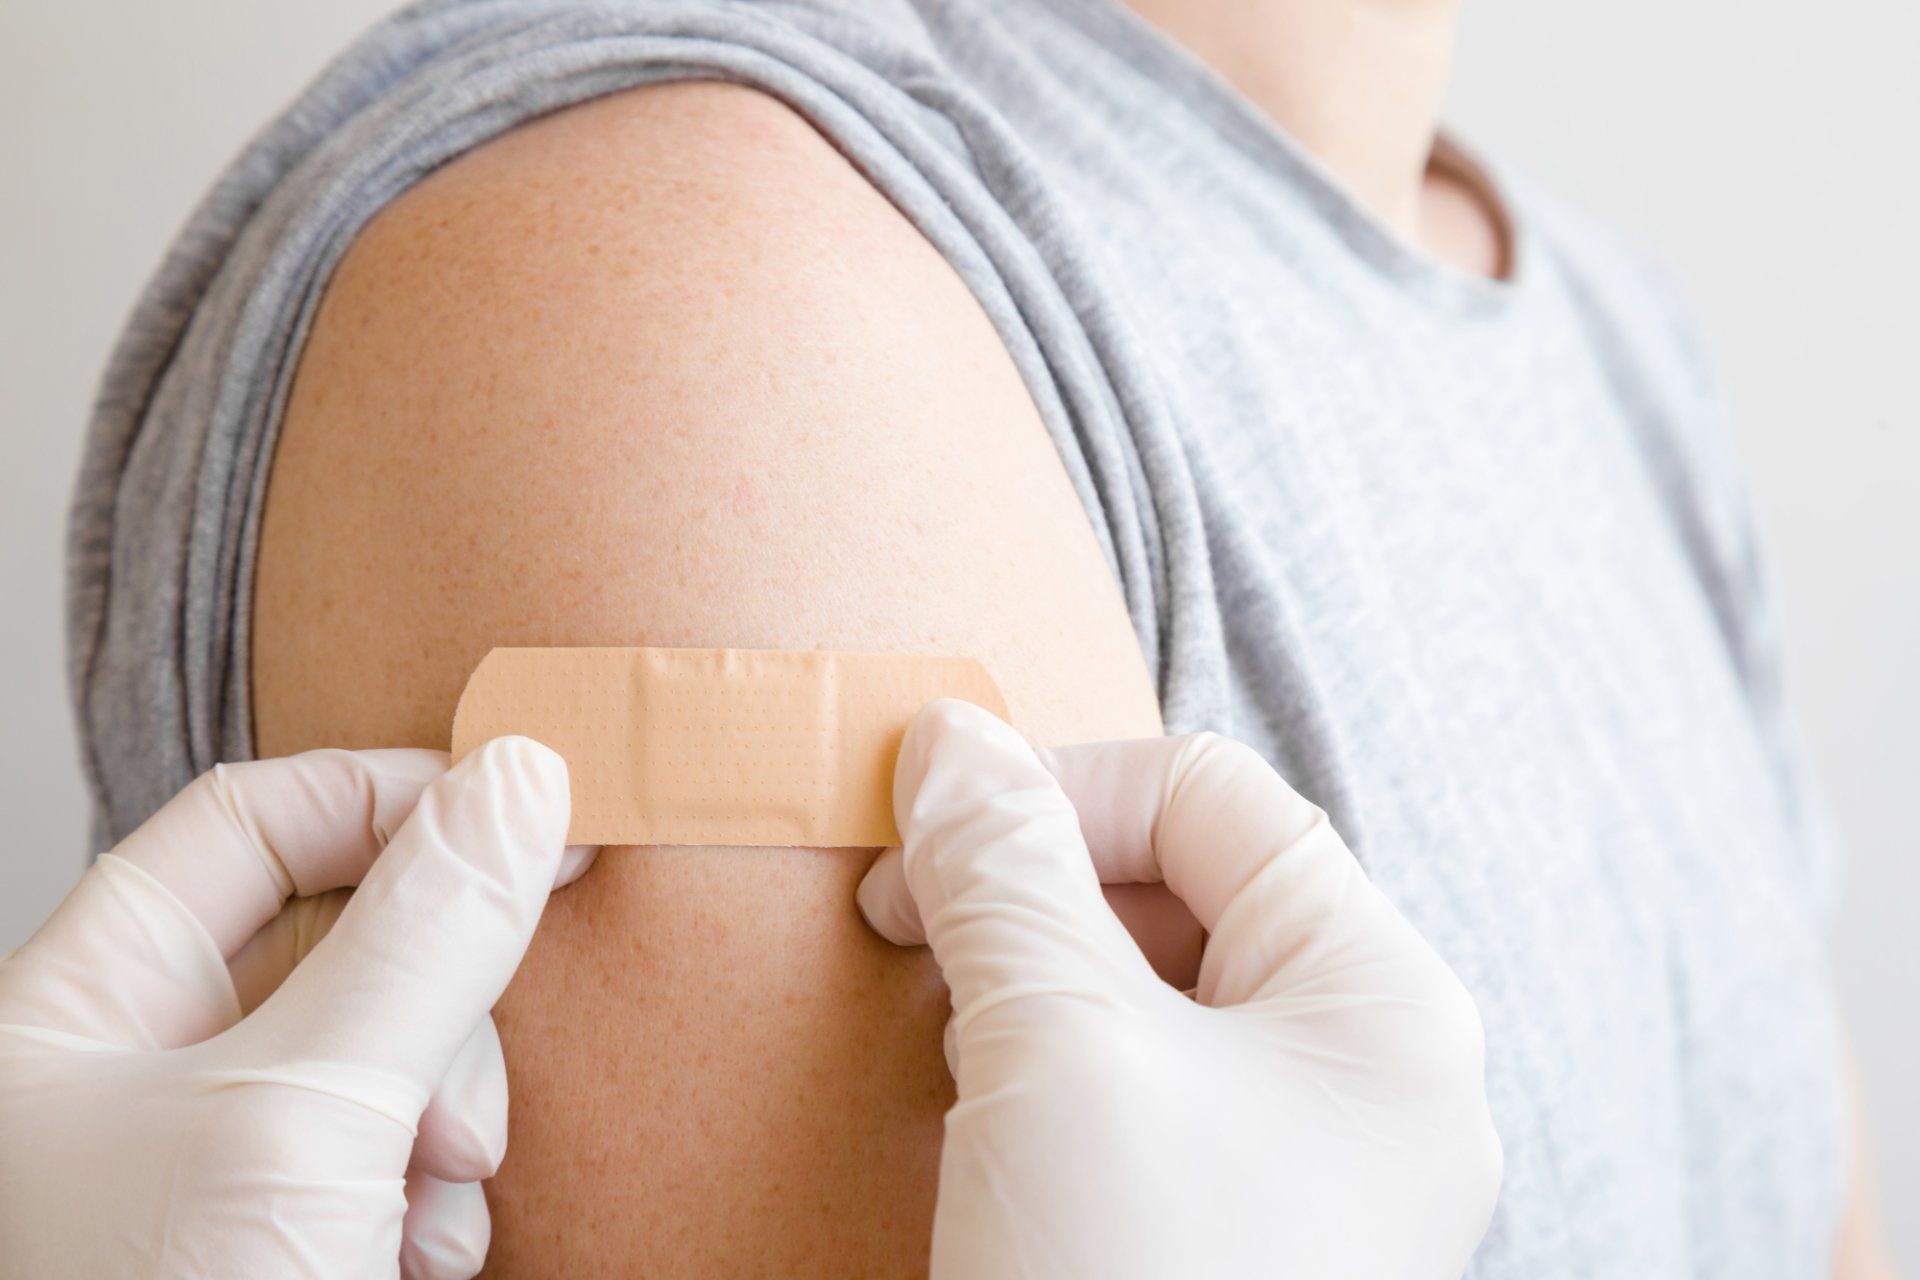 doctor applying bandage over vaccination site on skin